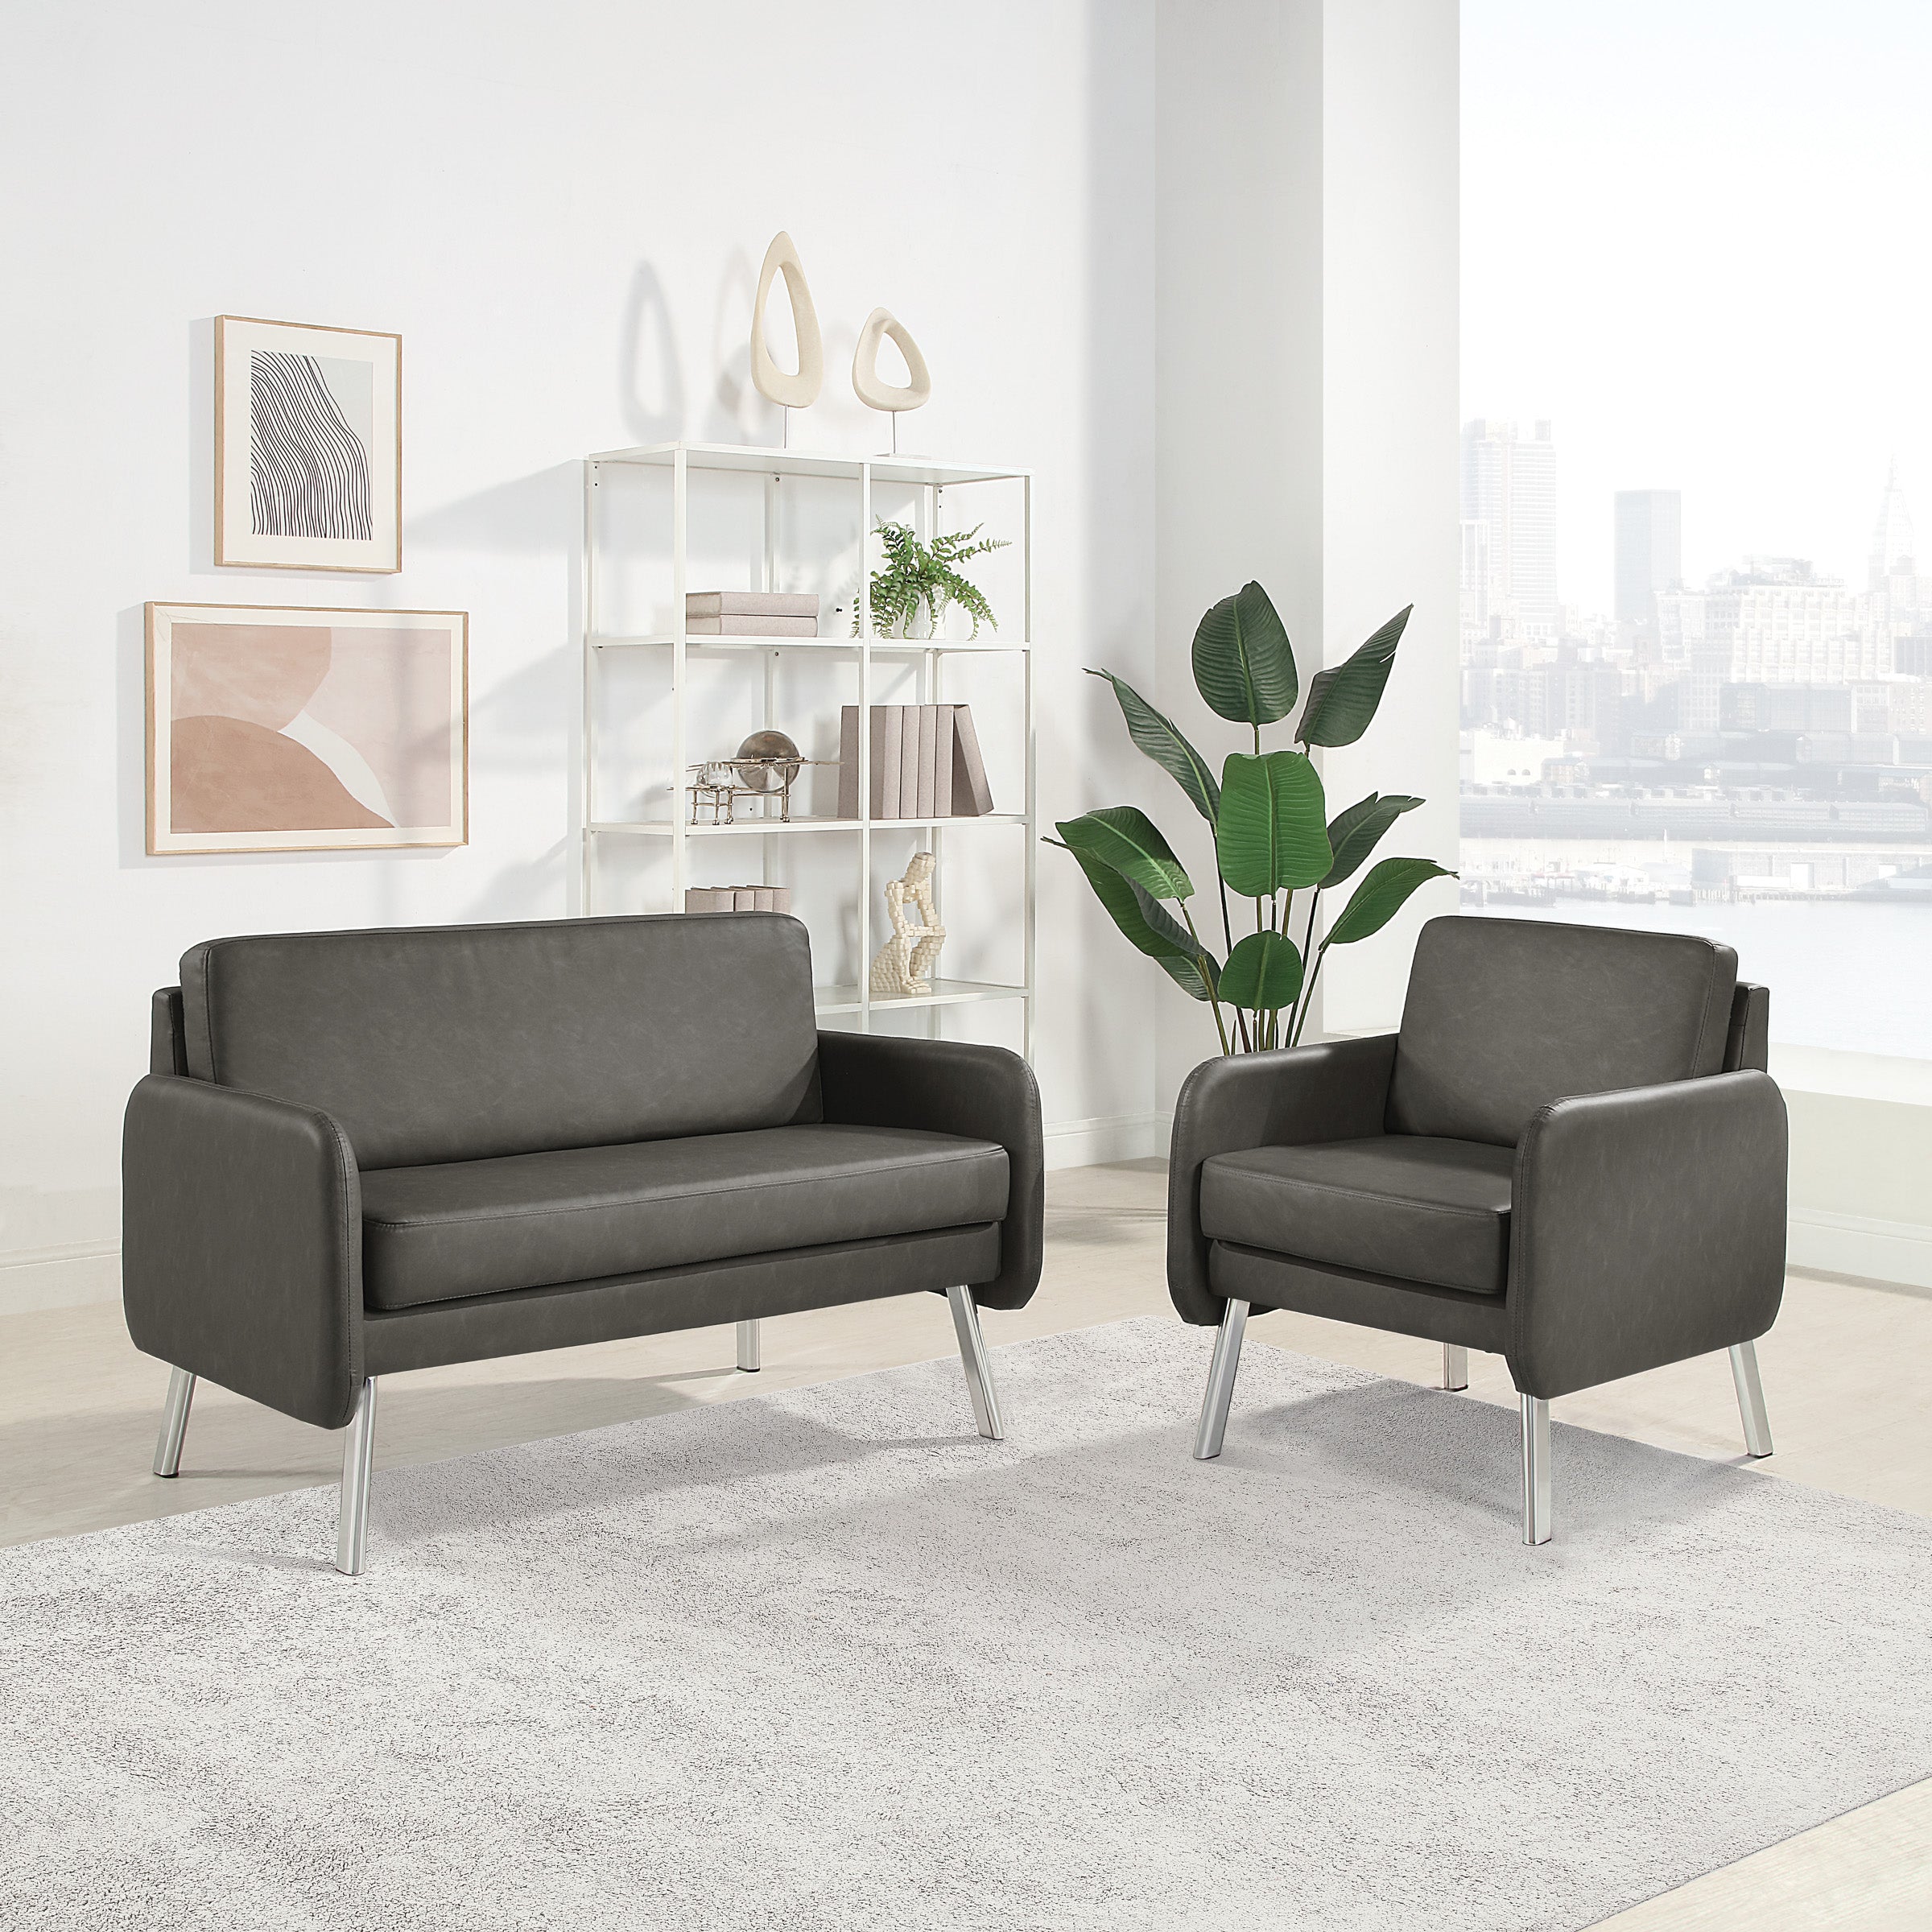 SL5602 - Modern Faux Leather Loveseat with Chrome Finish Legs by OSP